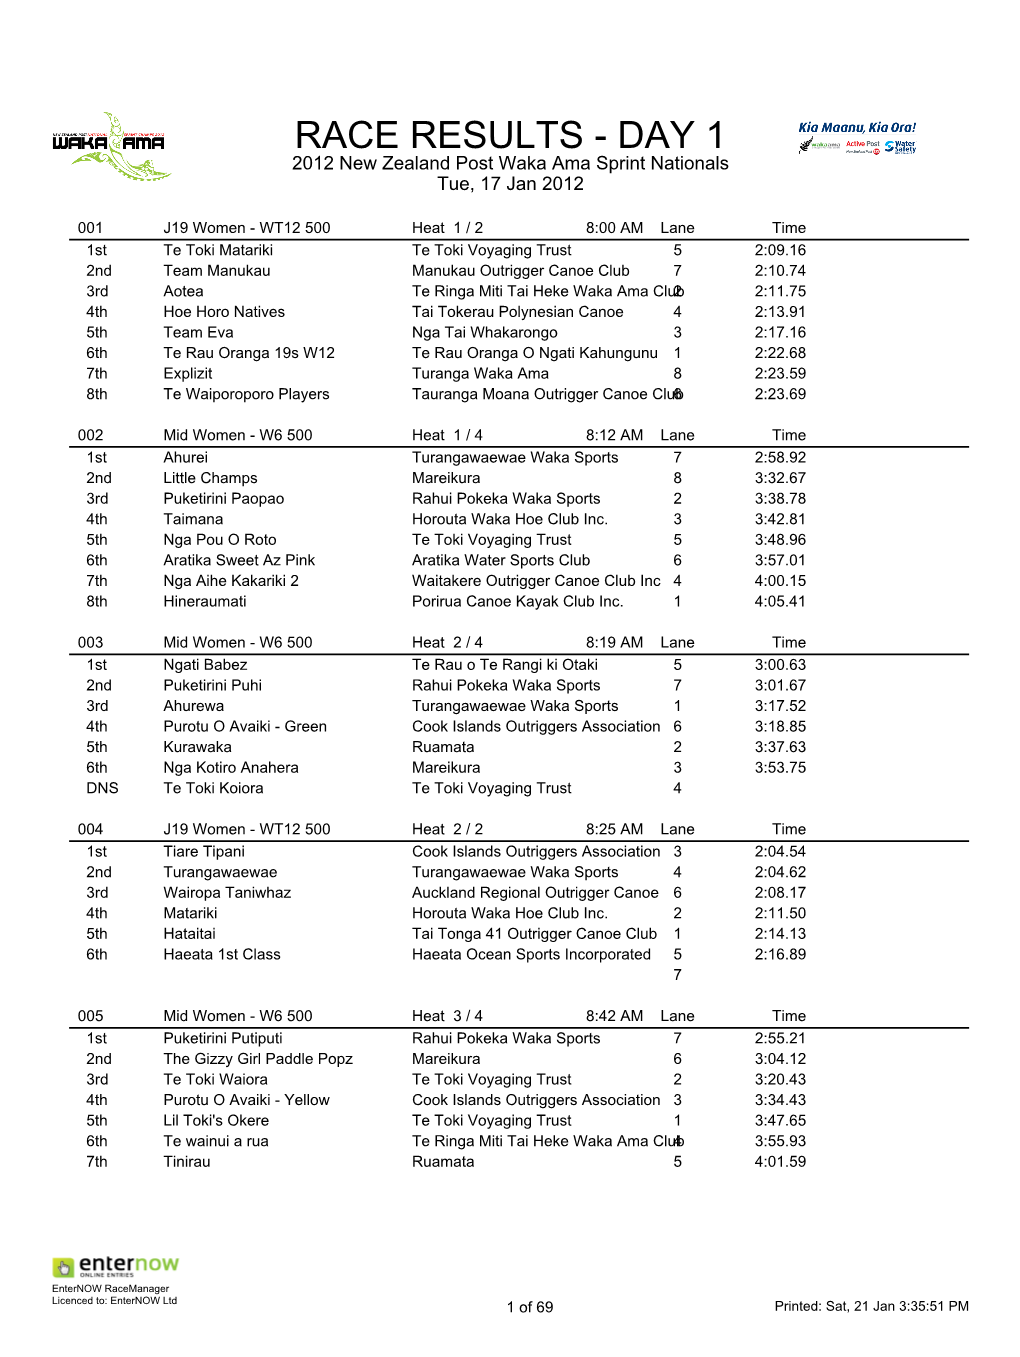 RACE RESULTS - DAY 1 2012 New Zealand Post Waka Ama Sprint Nationals Tue, 17 Jan 2012